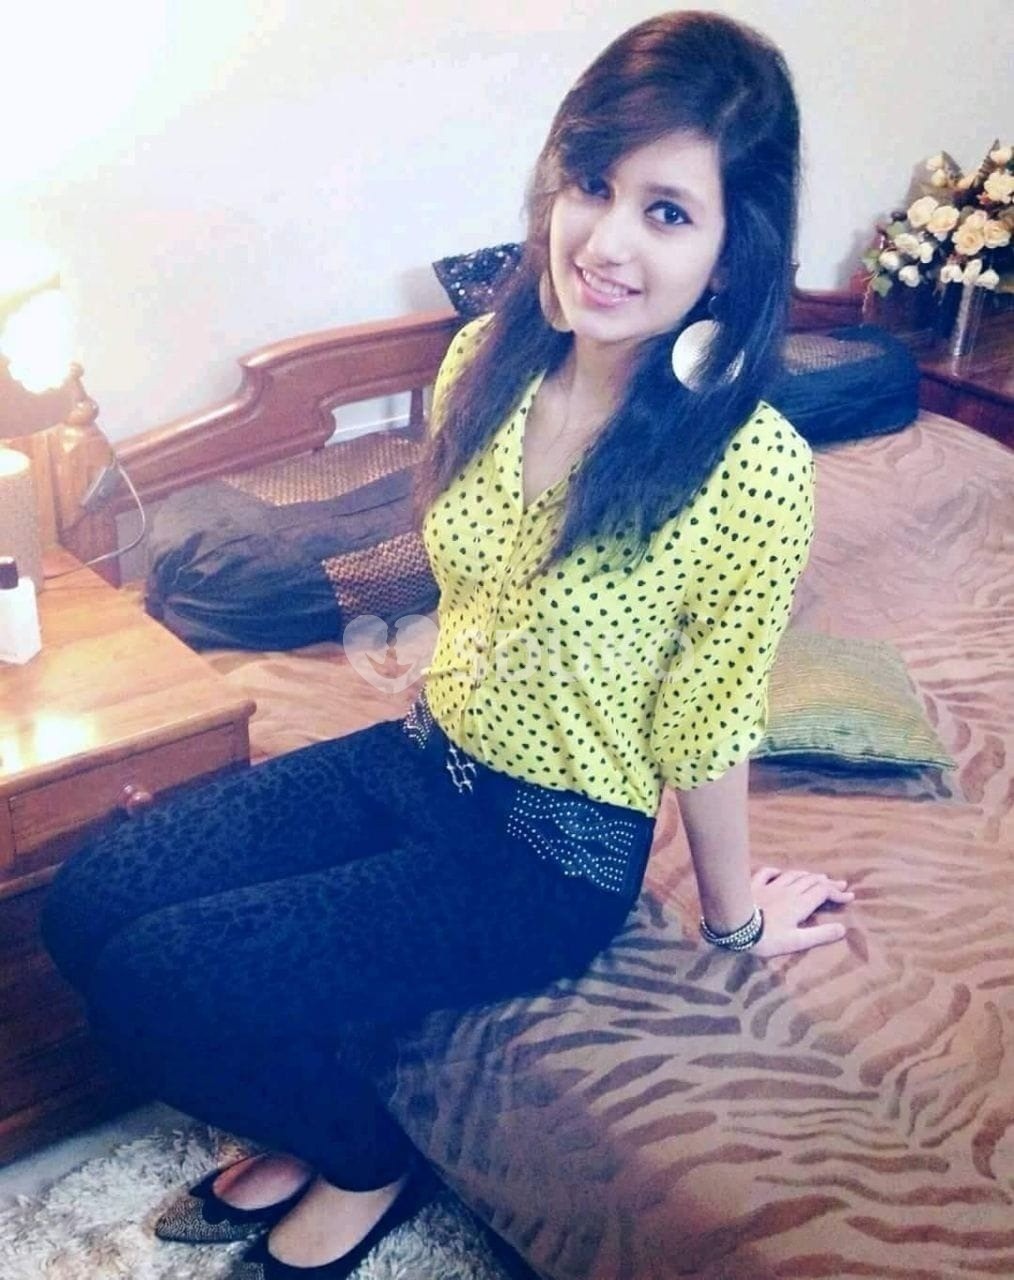 Call girl in Hyderabad self and secure high profile girl available...